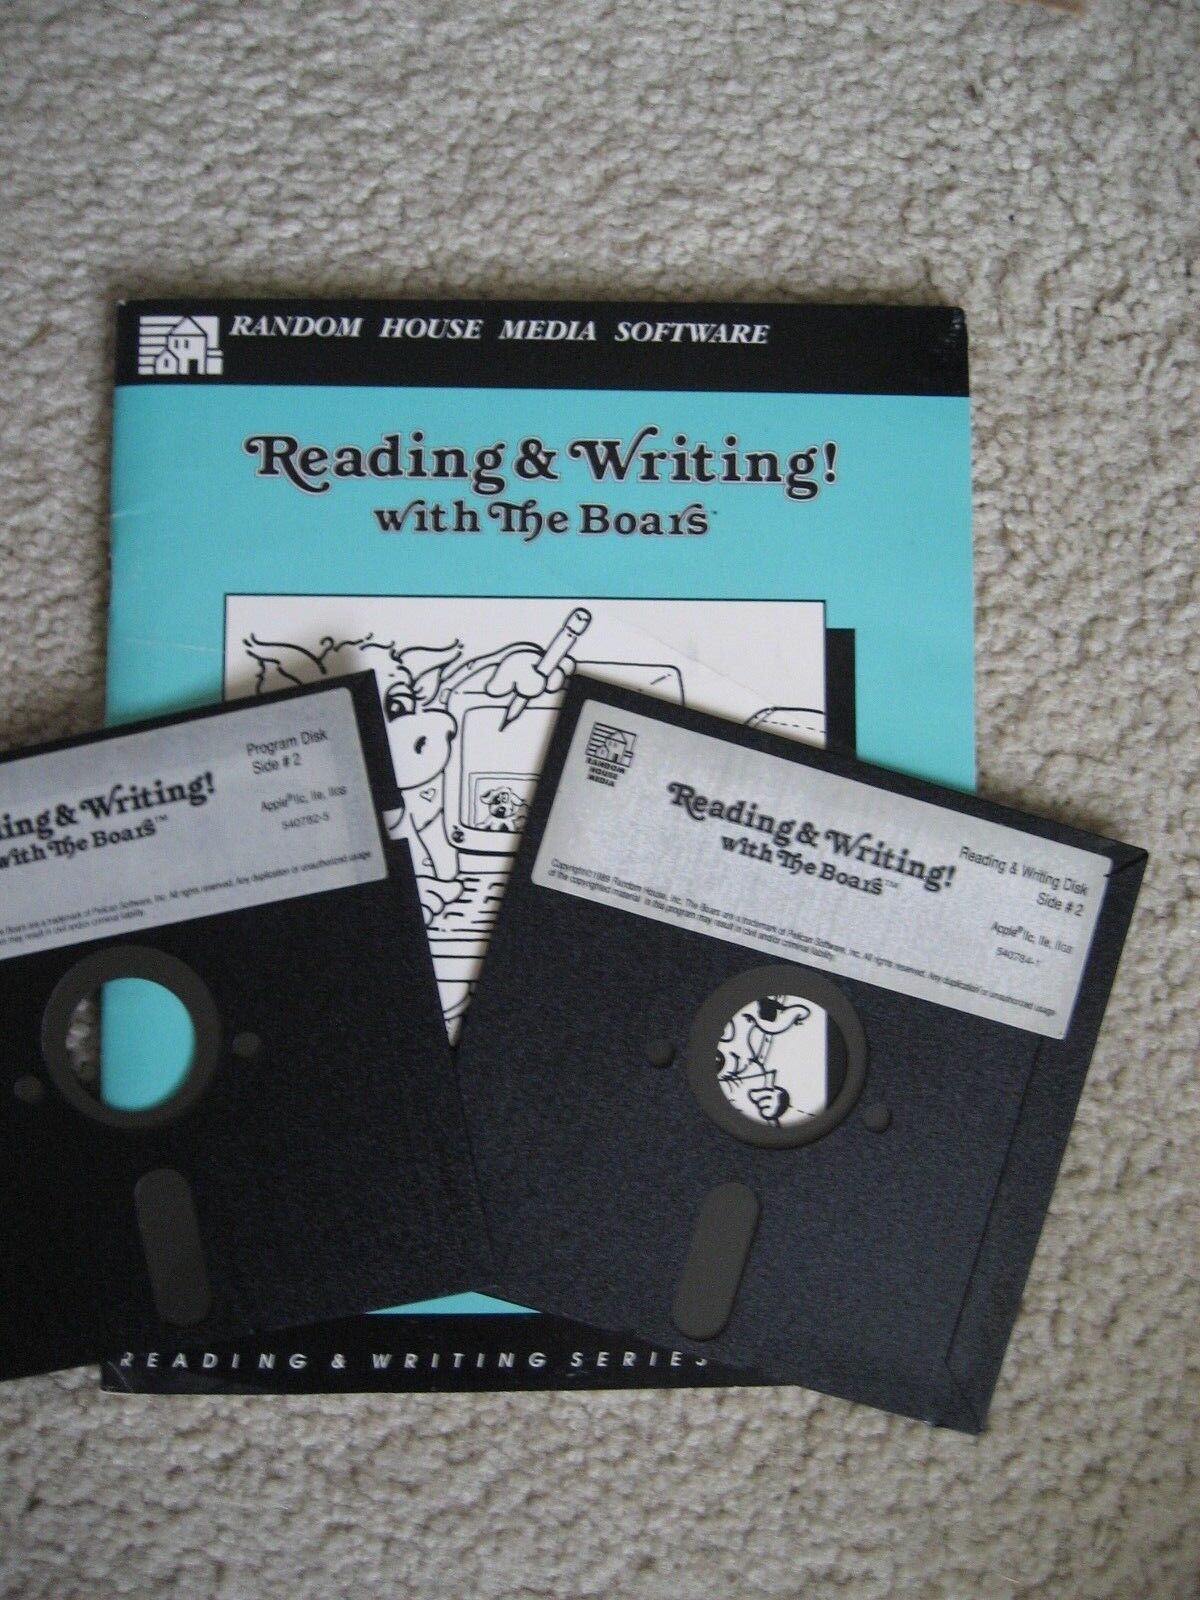 Reading & Writing with the Boars RANDOM HOUSE MEDIA SOFTWARE Disks Manual AS IS